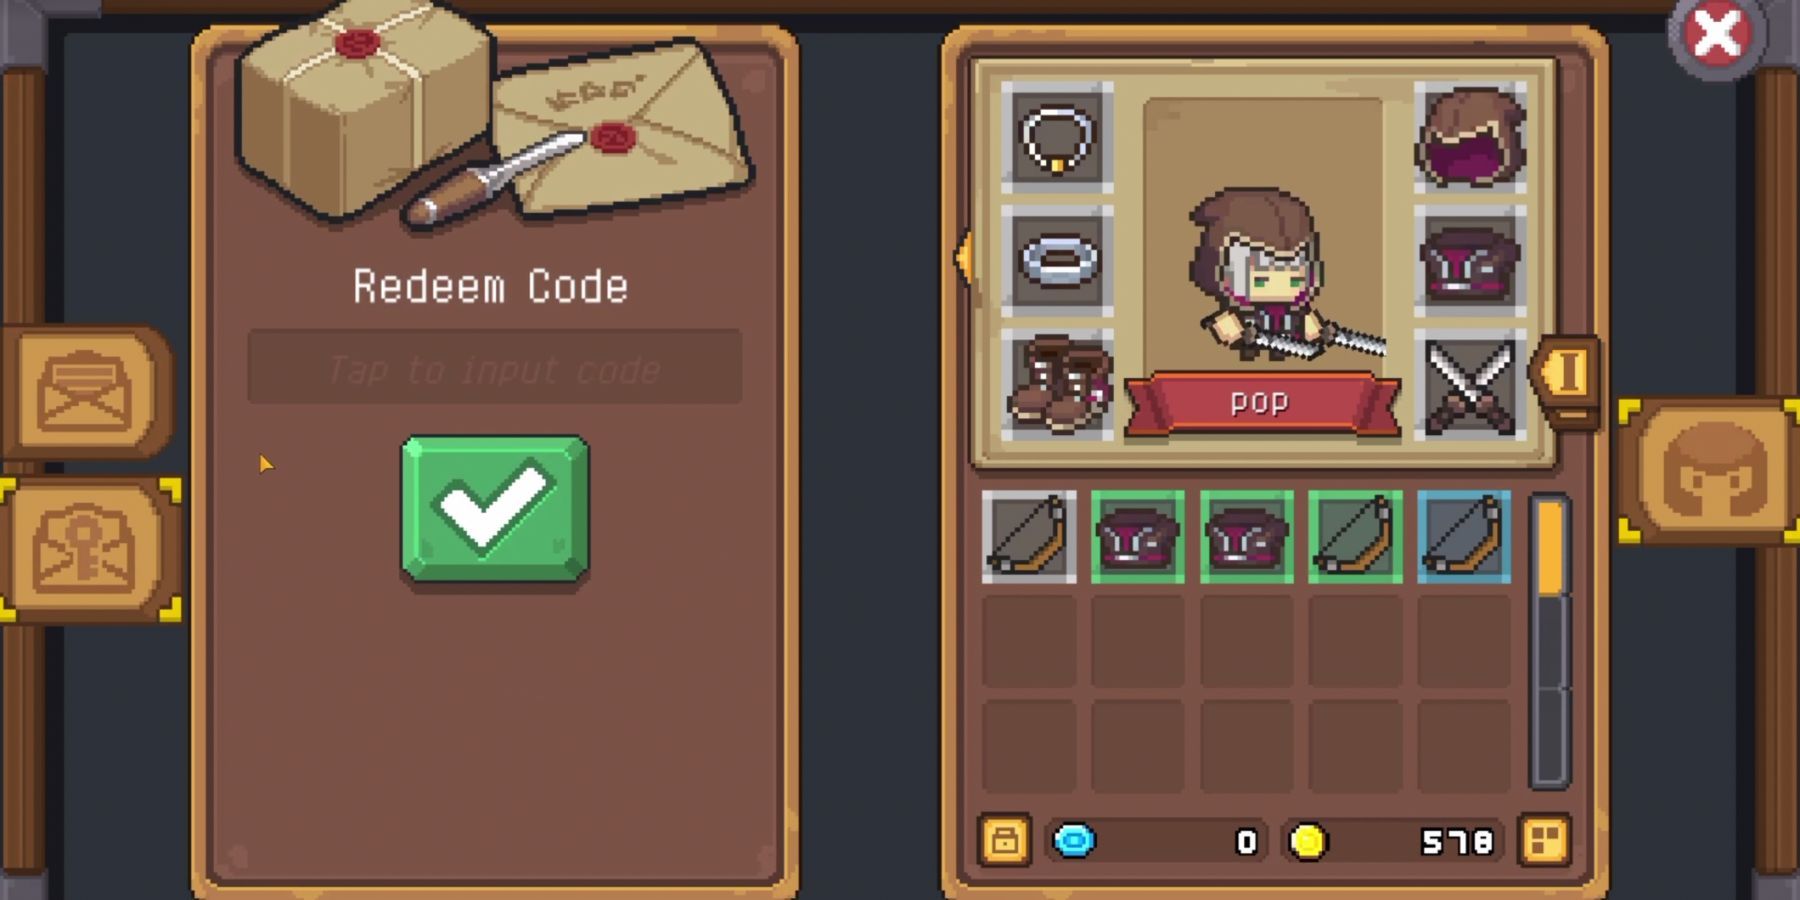 Soul Knight Prequel: an input field for codes